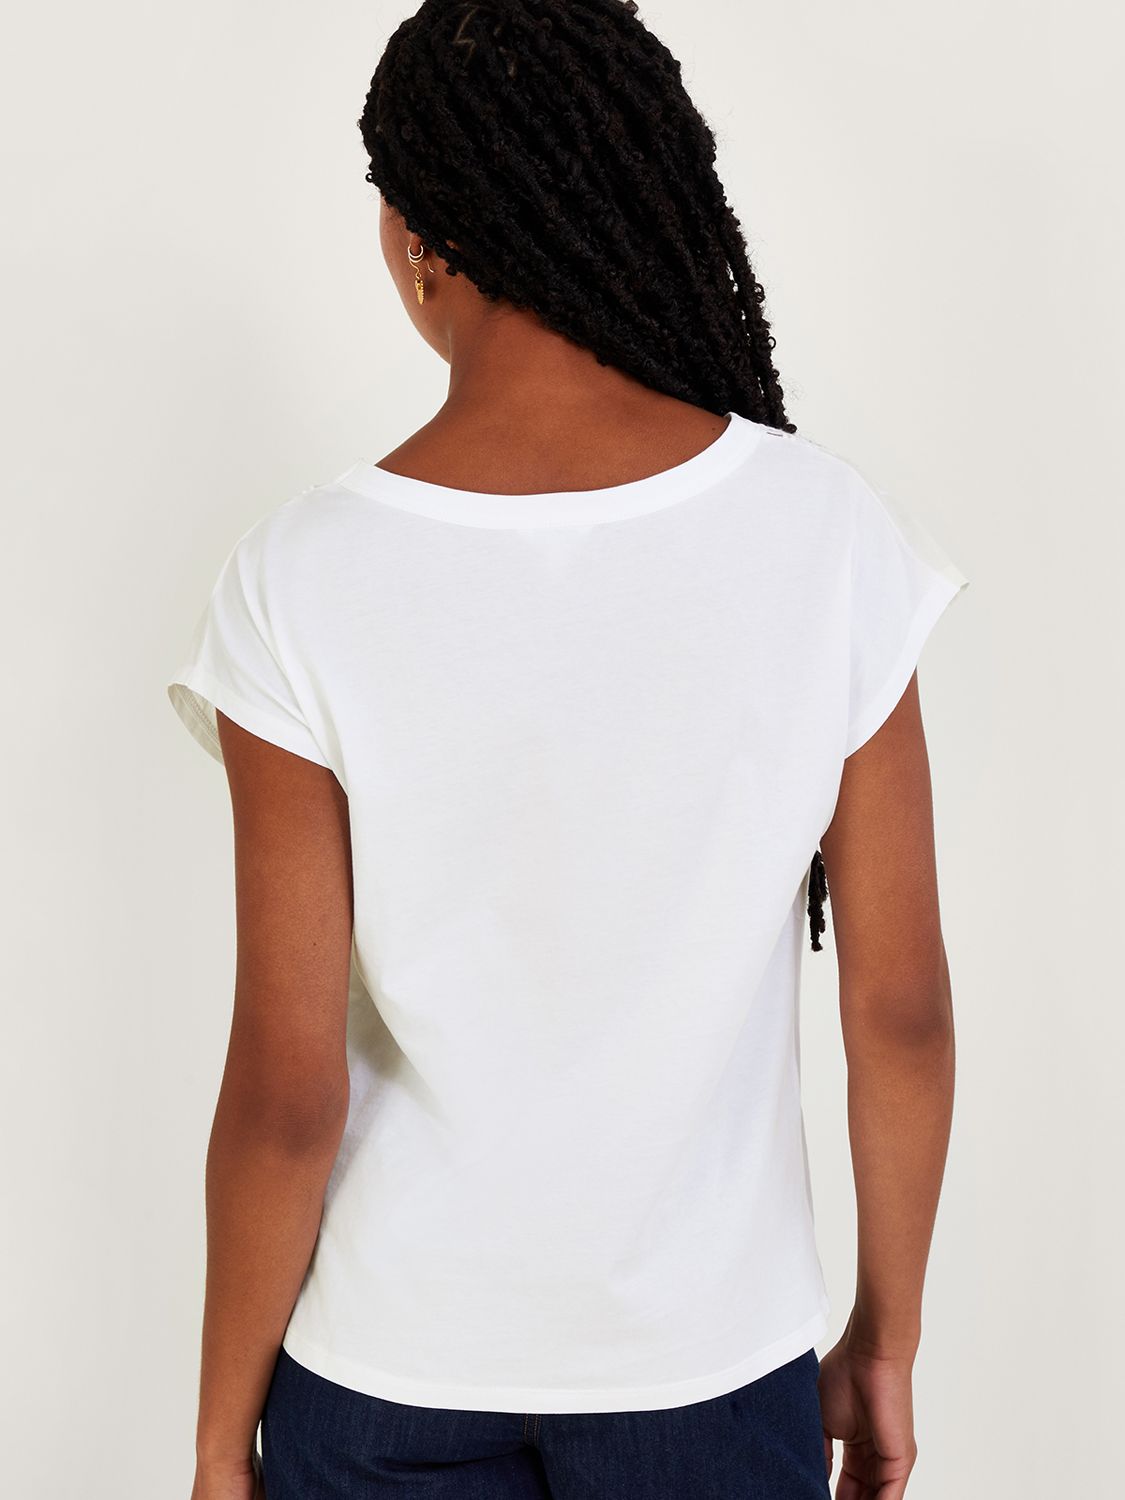 Buy Monsoon Floral Cut Out T-Shirt Online at johnlewis.com